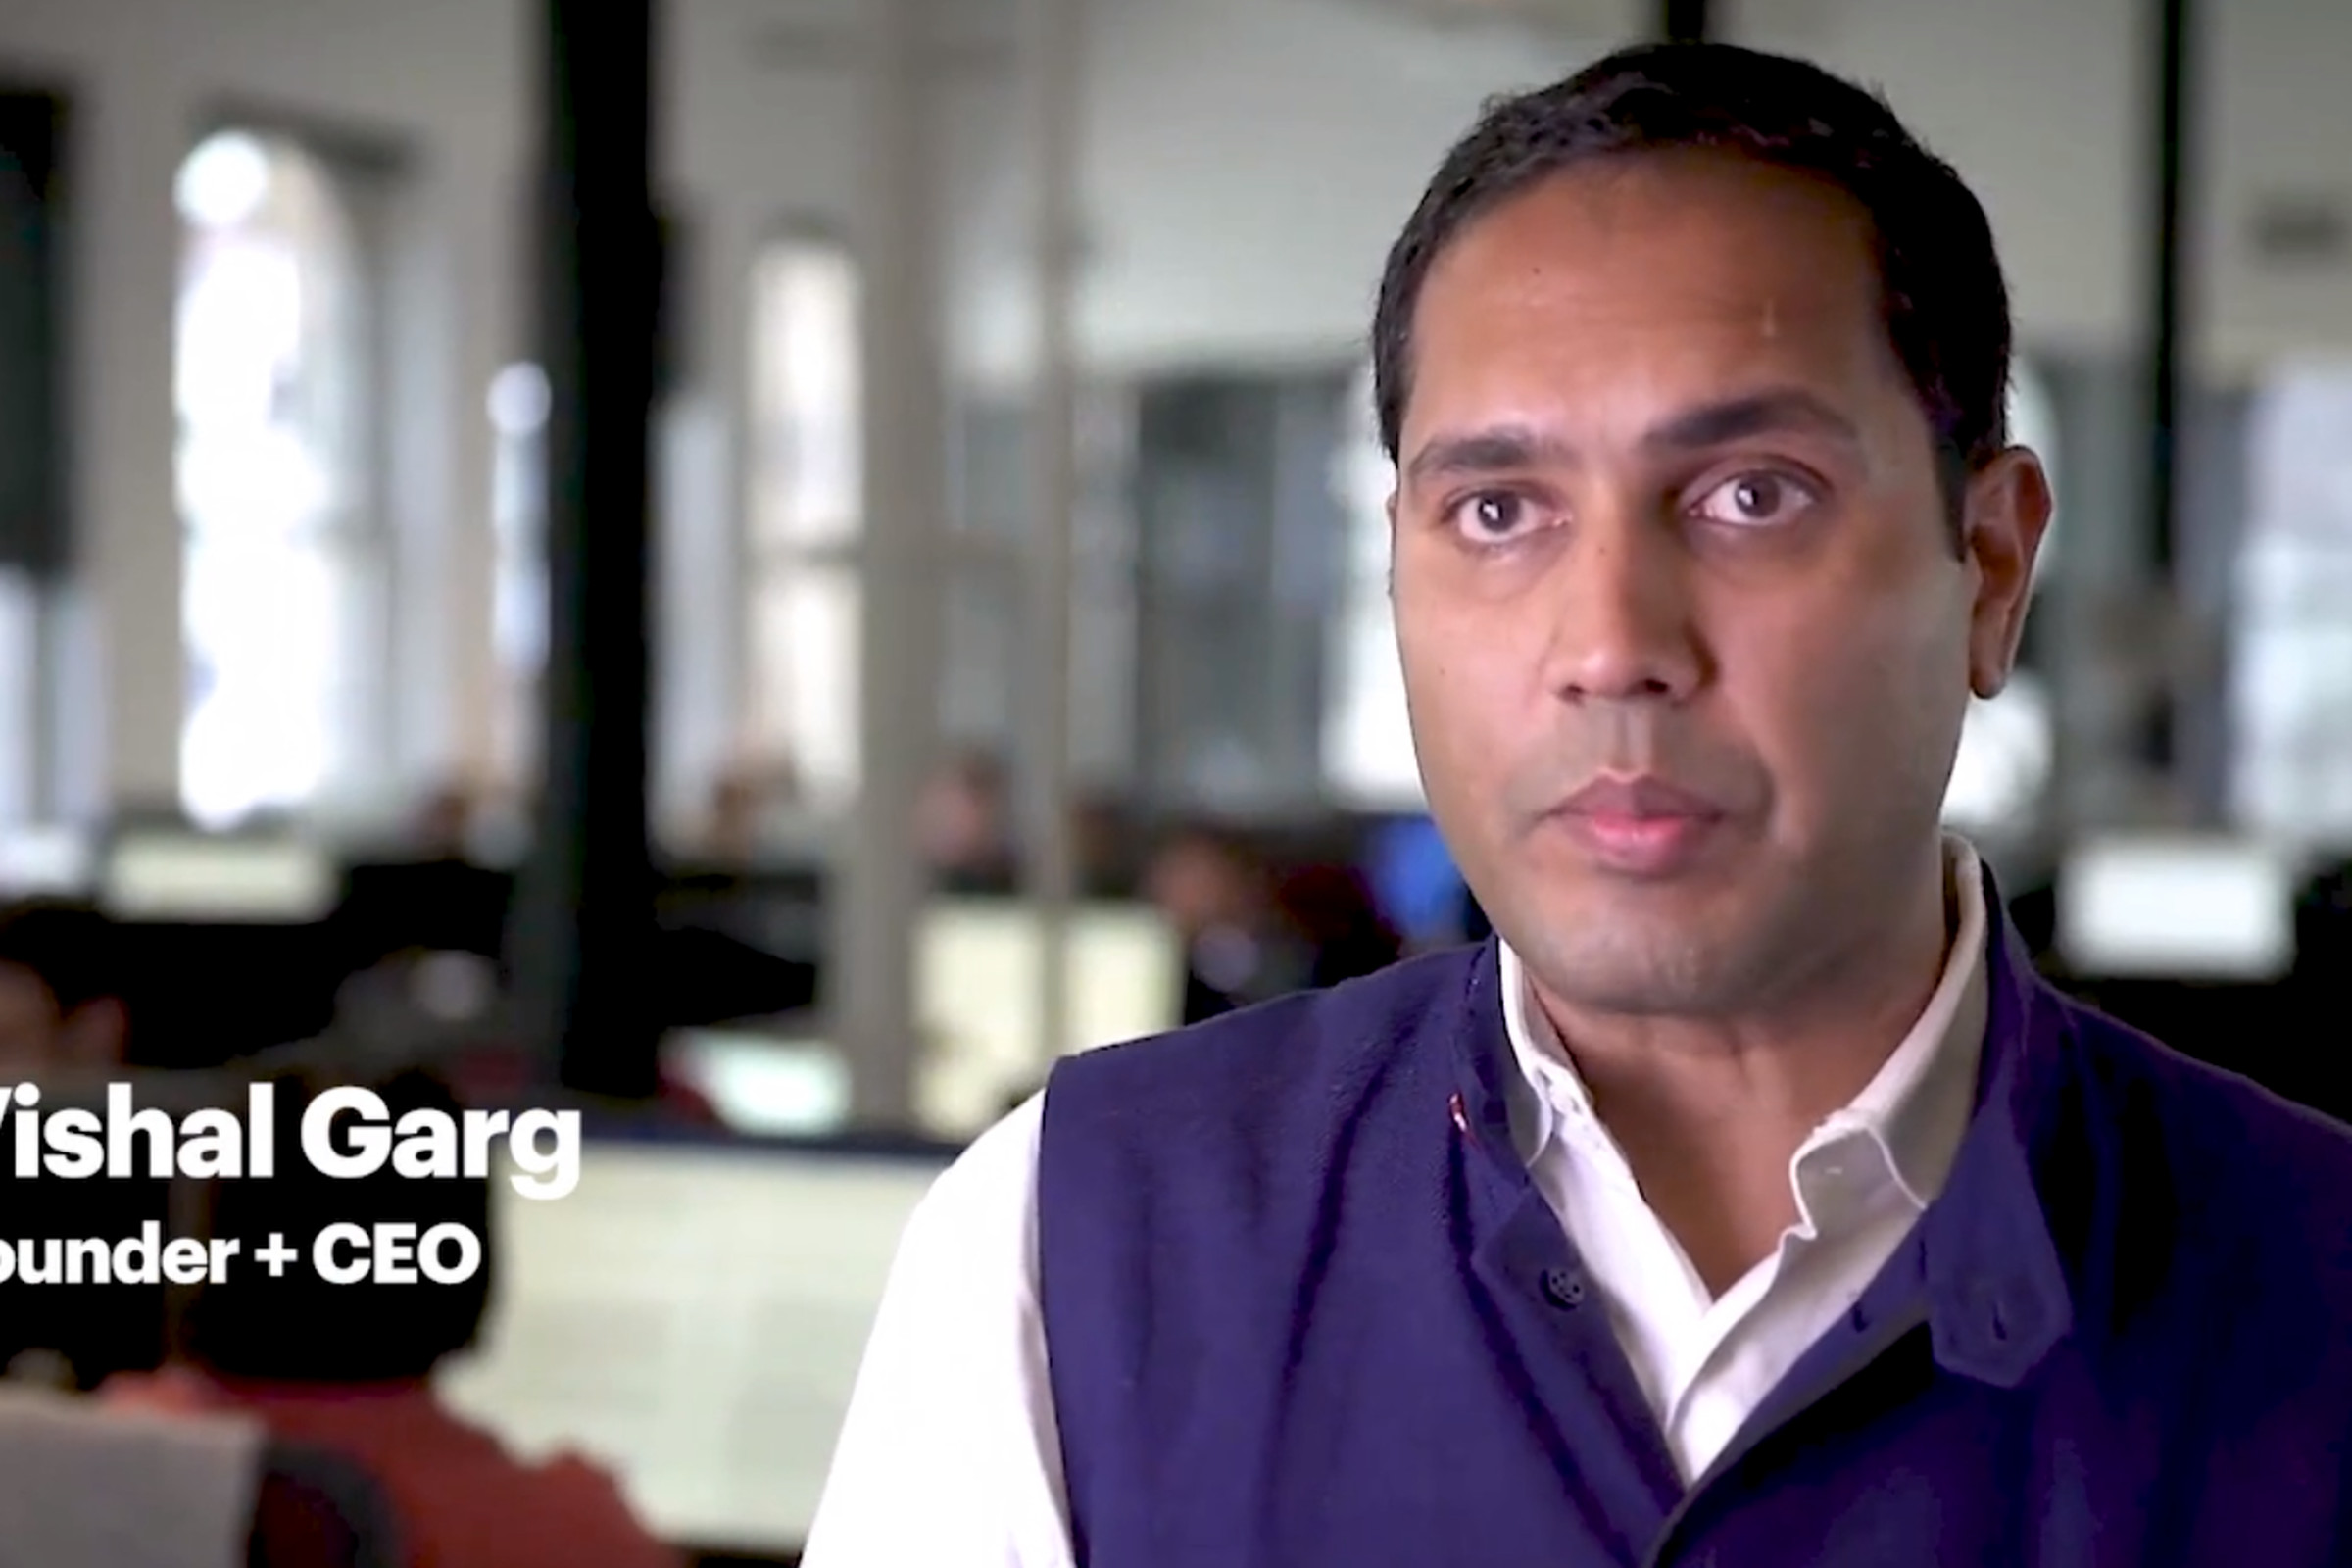 CEO Vishal Garg is reportedly taking time off from Better.com, the company he founded in 2012.